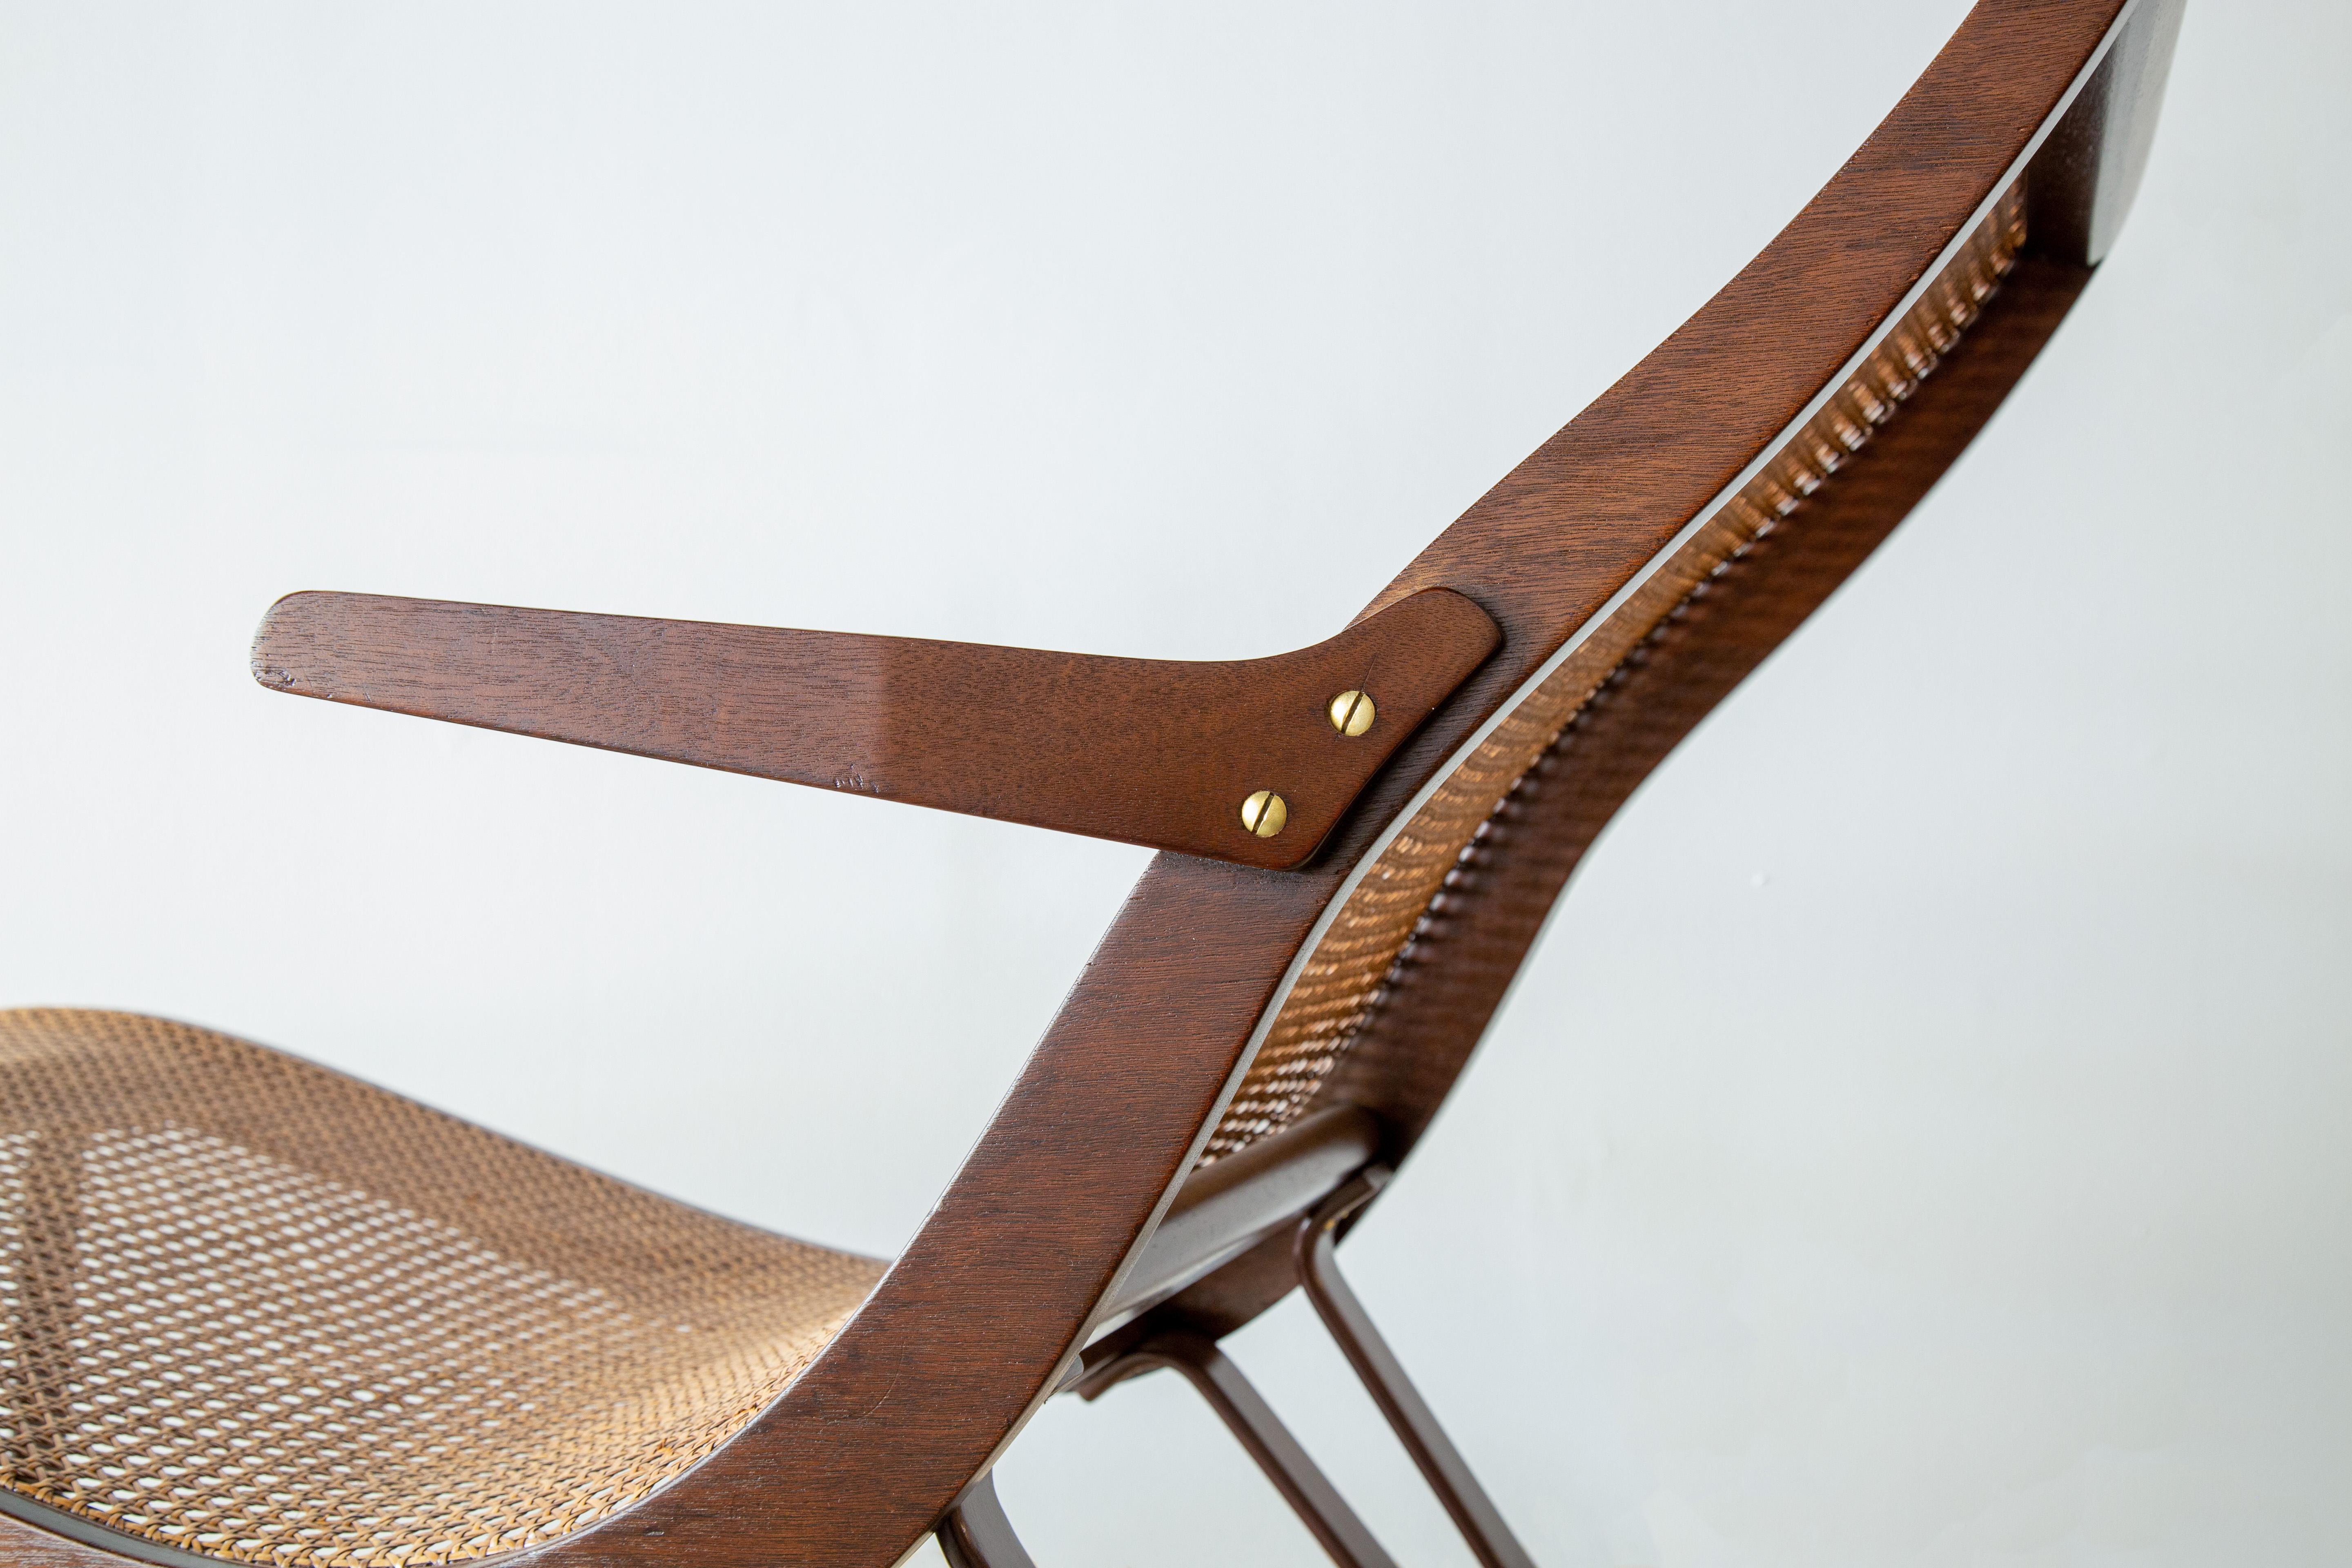 Mid-20th Century Cane and Mahogany Chaise lounge designed by Edward Wormley for Dunbar 